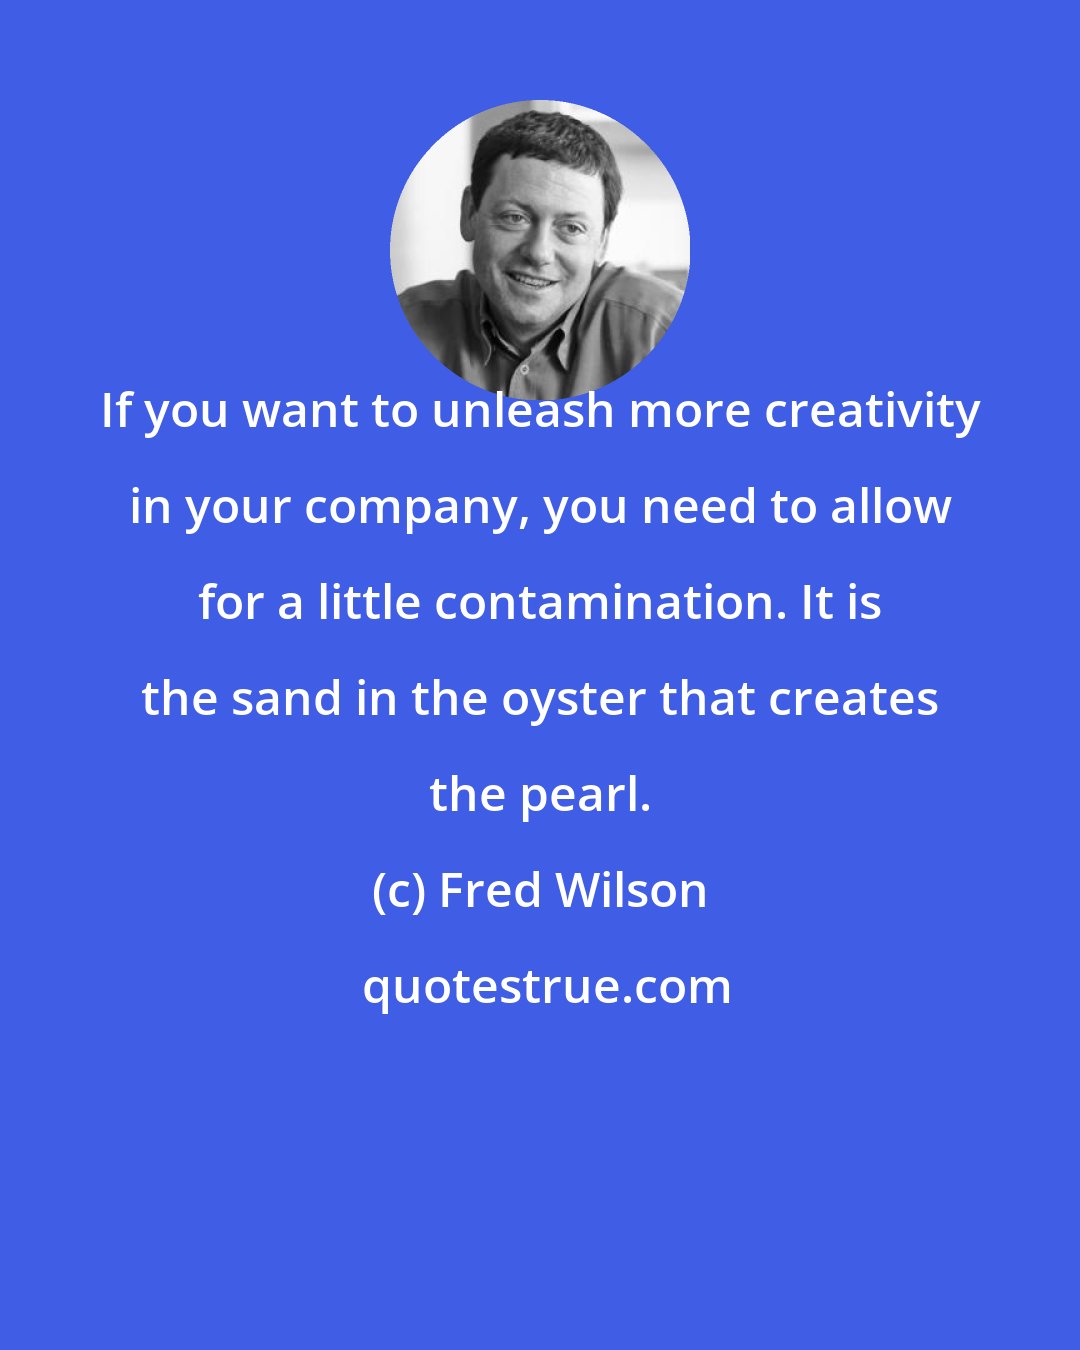 Fred Wilson: If you want to unleash more creativity in your company, you need to allow for a little contamination. It is the sand in the oyster that creates the pearl.